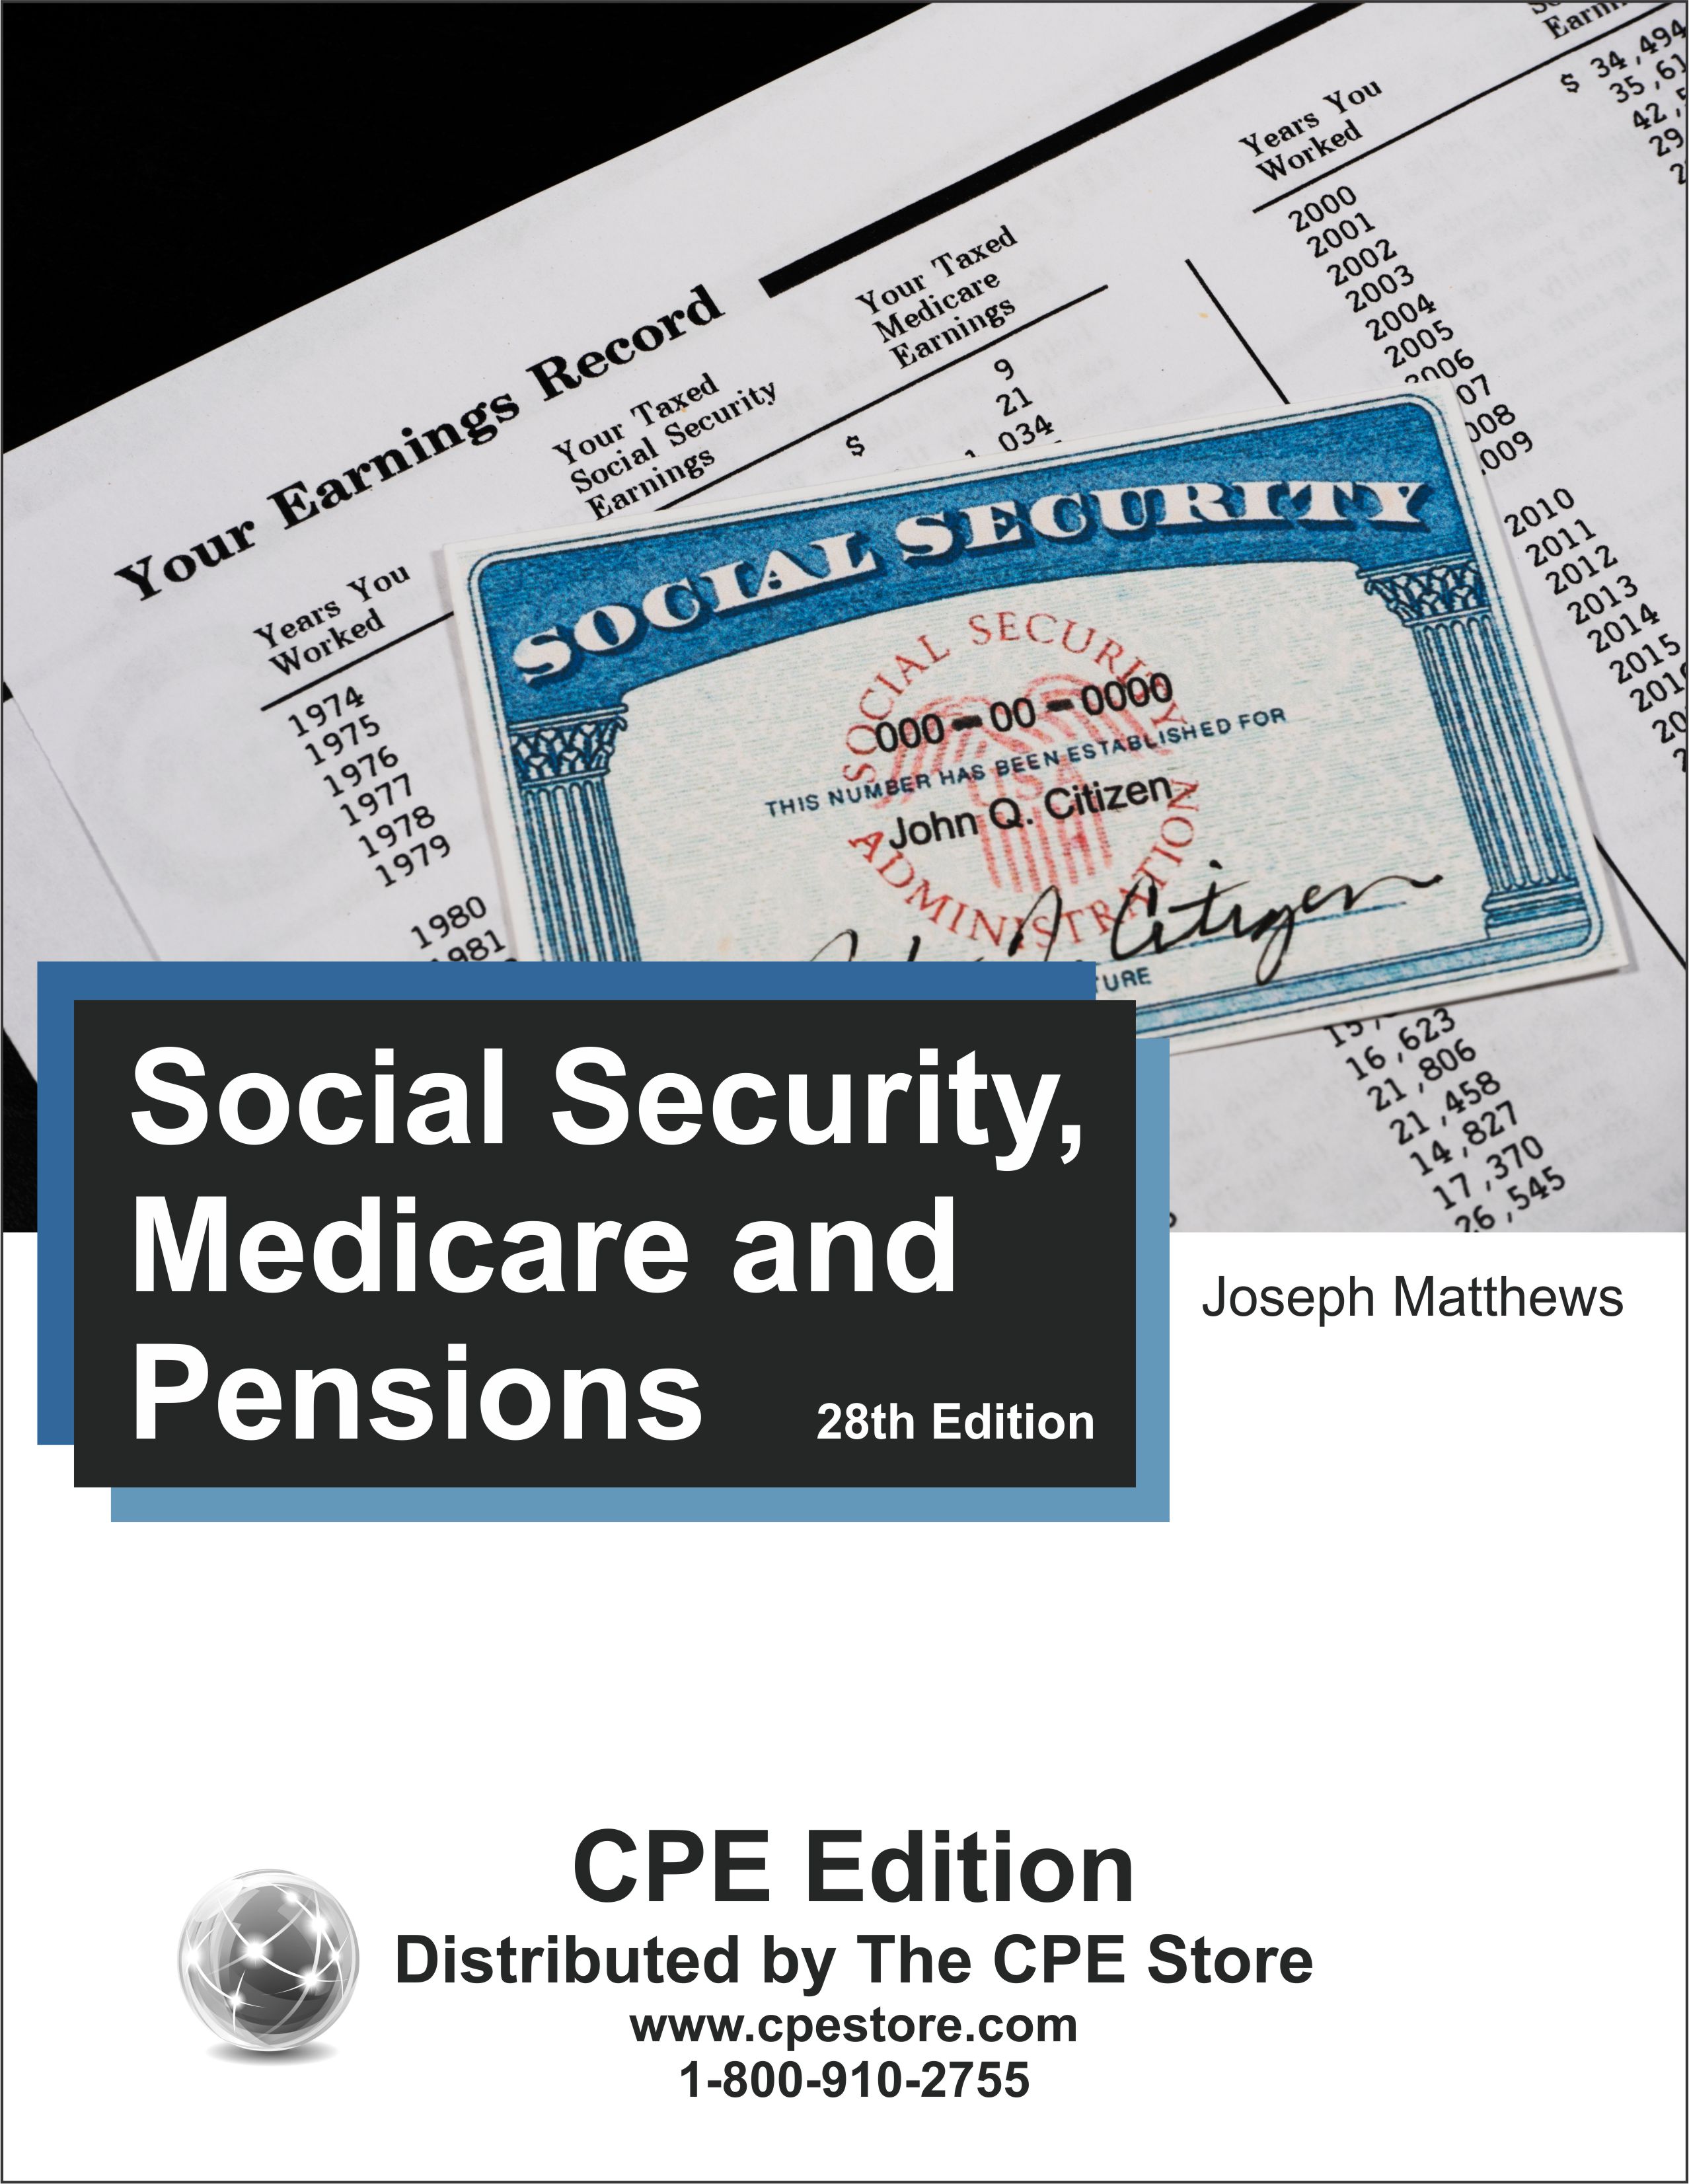 Social Security, Medicare and Pensions